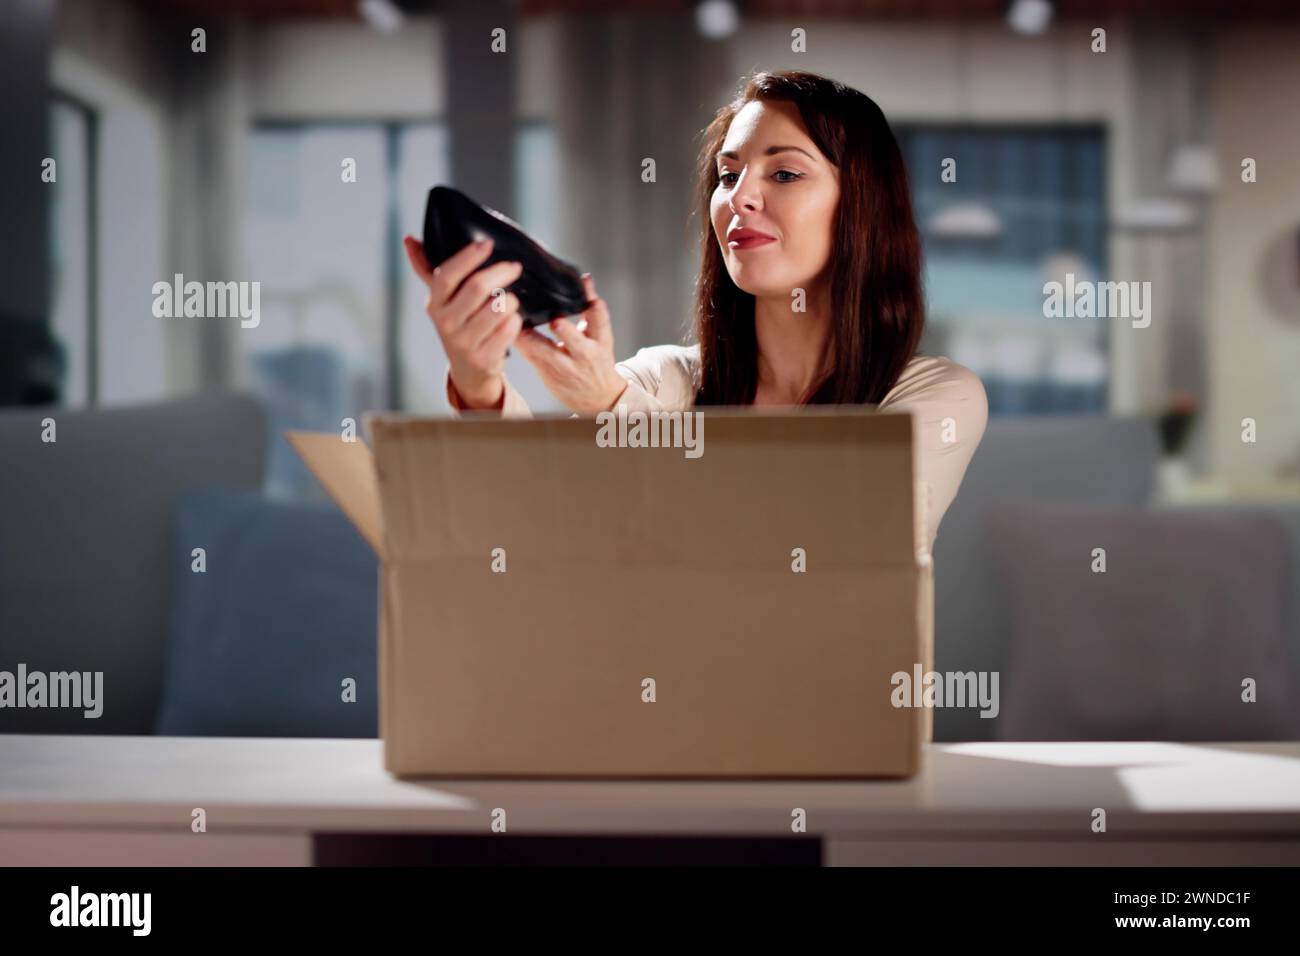 Smiling Young Woman Sitting On Sofa Unpacking Received Parcel Stock Photo